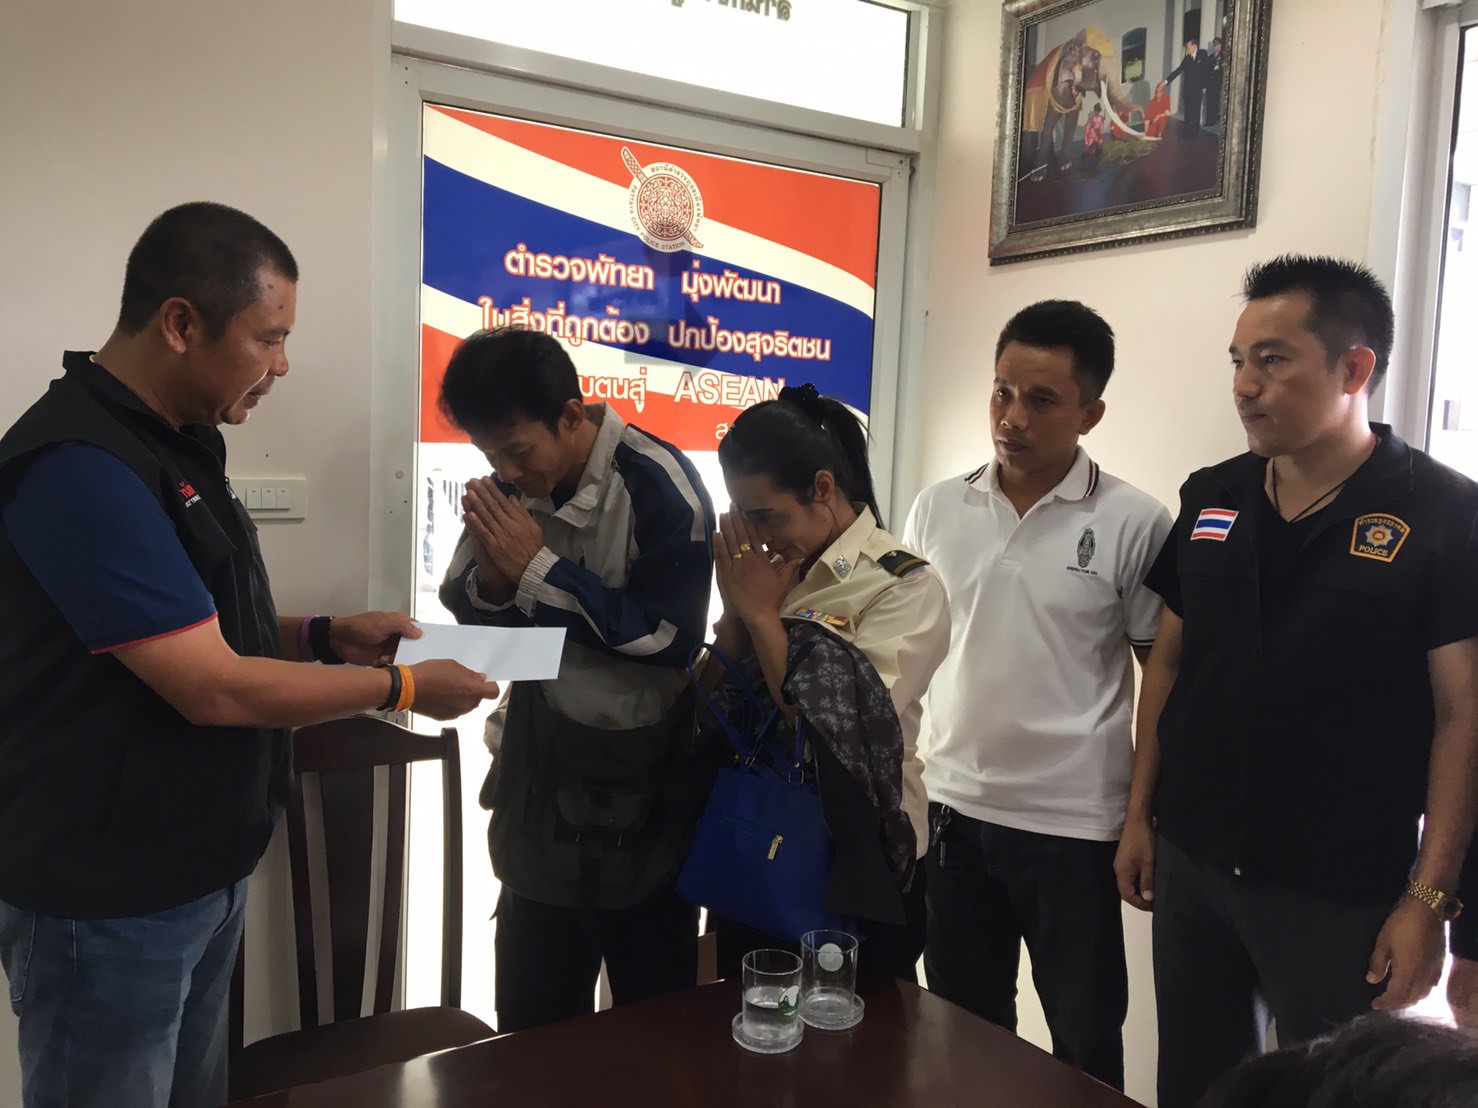 Pattaya police chief, Pol. Col. Apichai Kroppech gave Sompod and Kanlaya Pahulo a reward and planned to present them certificates for their bravery in catching a pair of teenagers who snatched a woman’s handbag on Soi Buakhao.